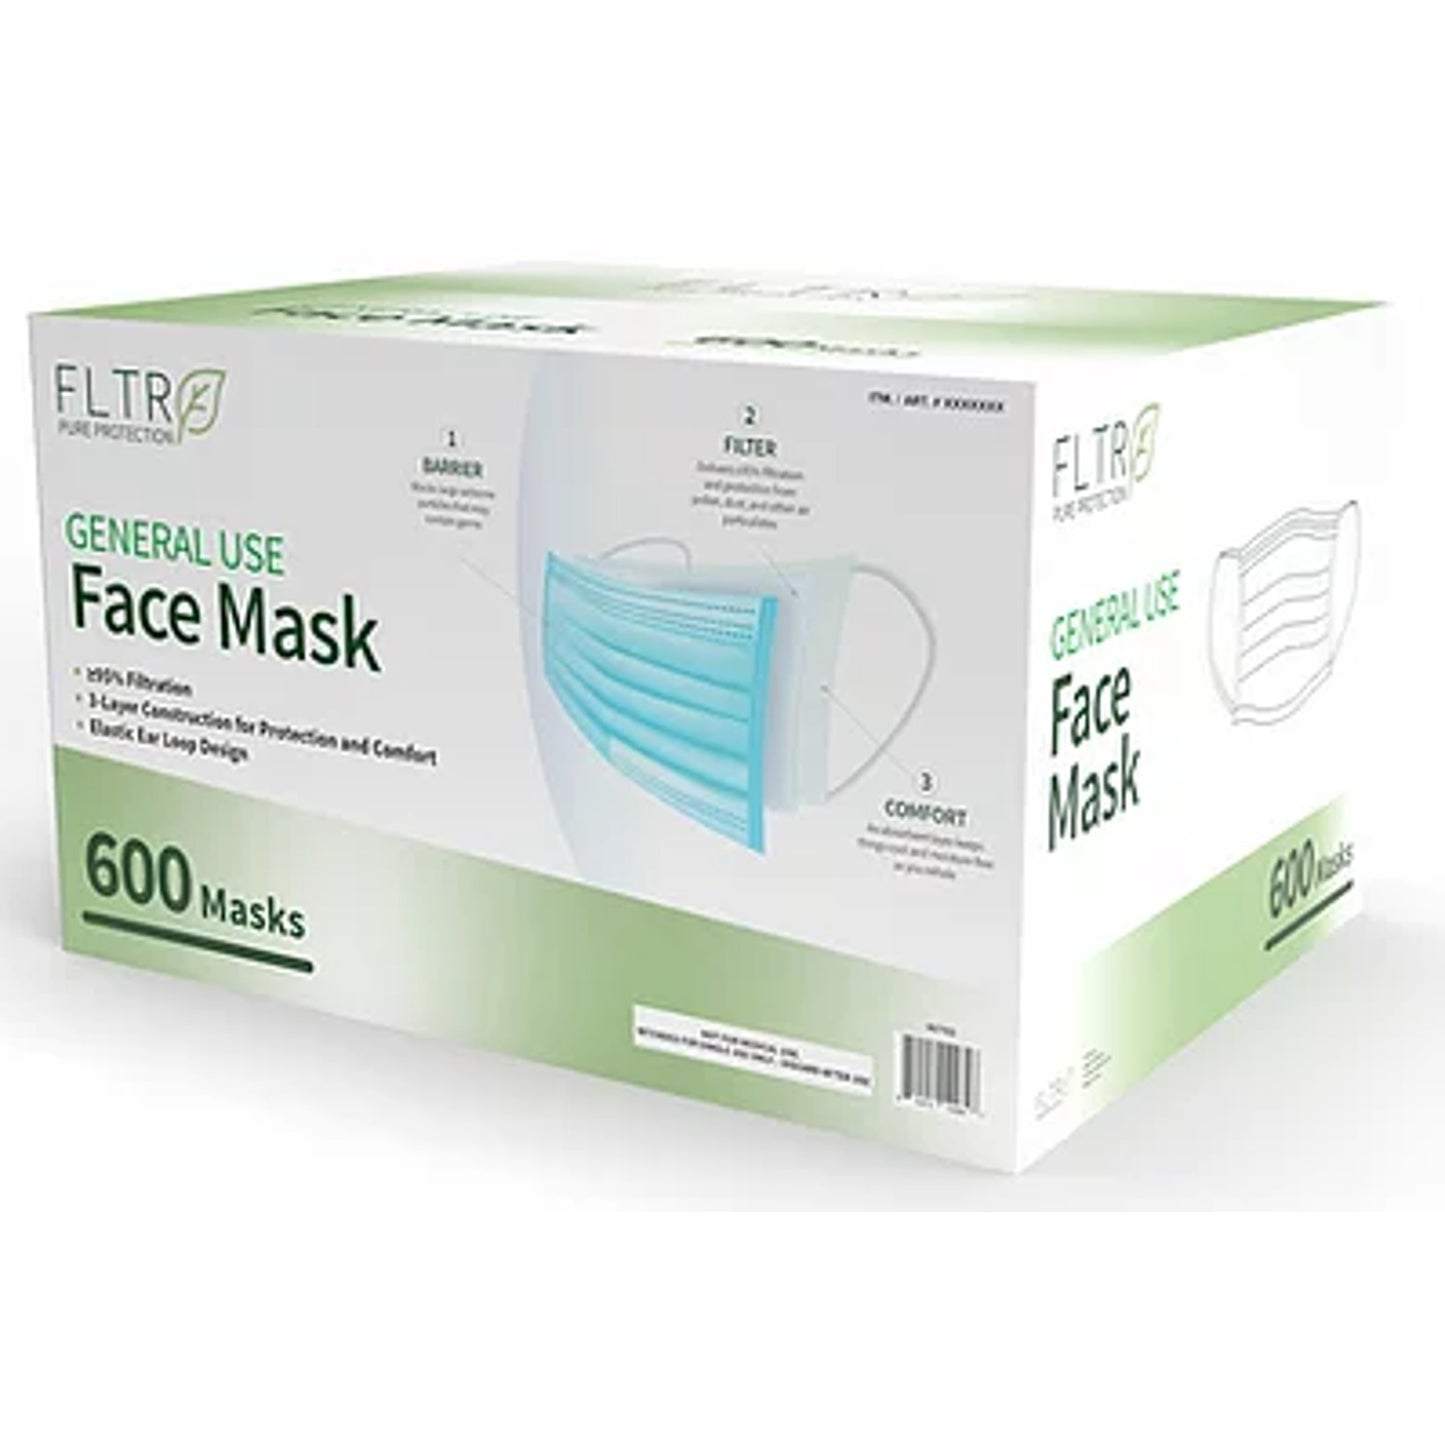 FLTR Face Mask Sized for Adults 3-layer 95% Filtration Blue 12 Case - 600 Pack